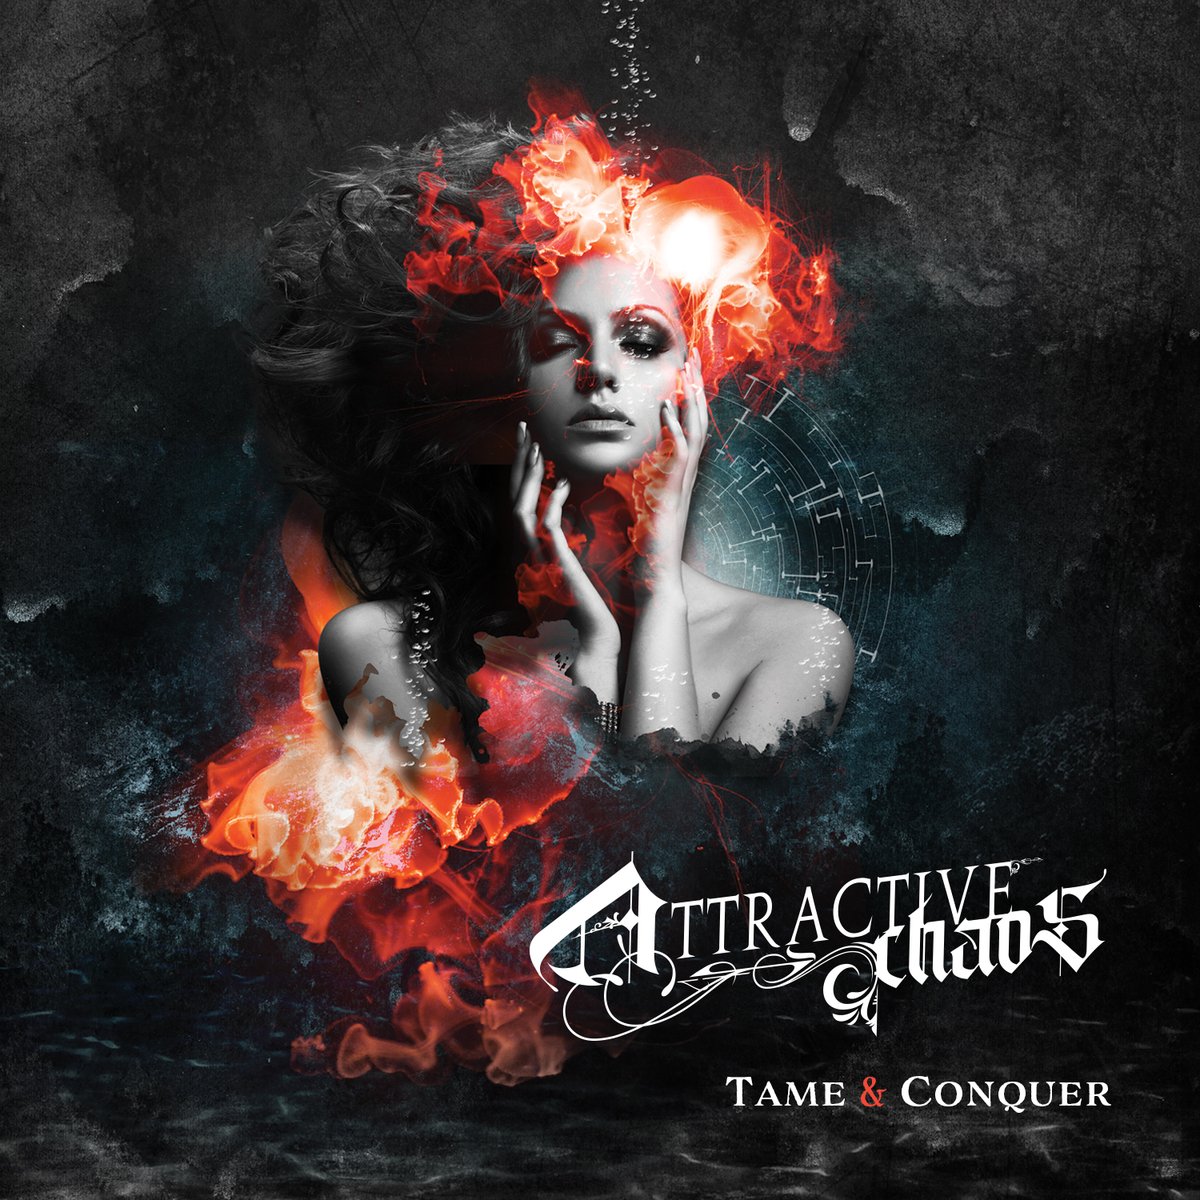 We are delighted to share the news that a new EP from Attractive Chaos is coming your way on August 14th! Get your pre-orders in for Tame & Conquer now at attractivechaos.bigcartel.com Loads of Attractive Chaos on the way #attractivechaos #mickeymythridart #tameandconquer #melodicmetal